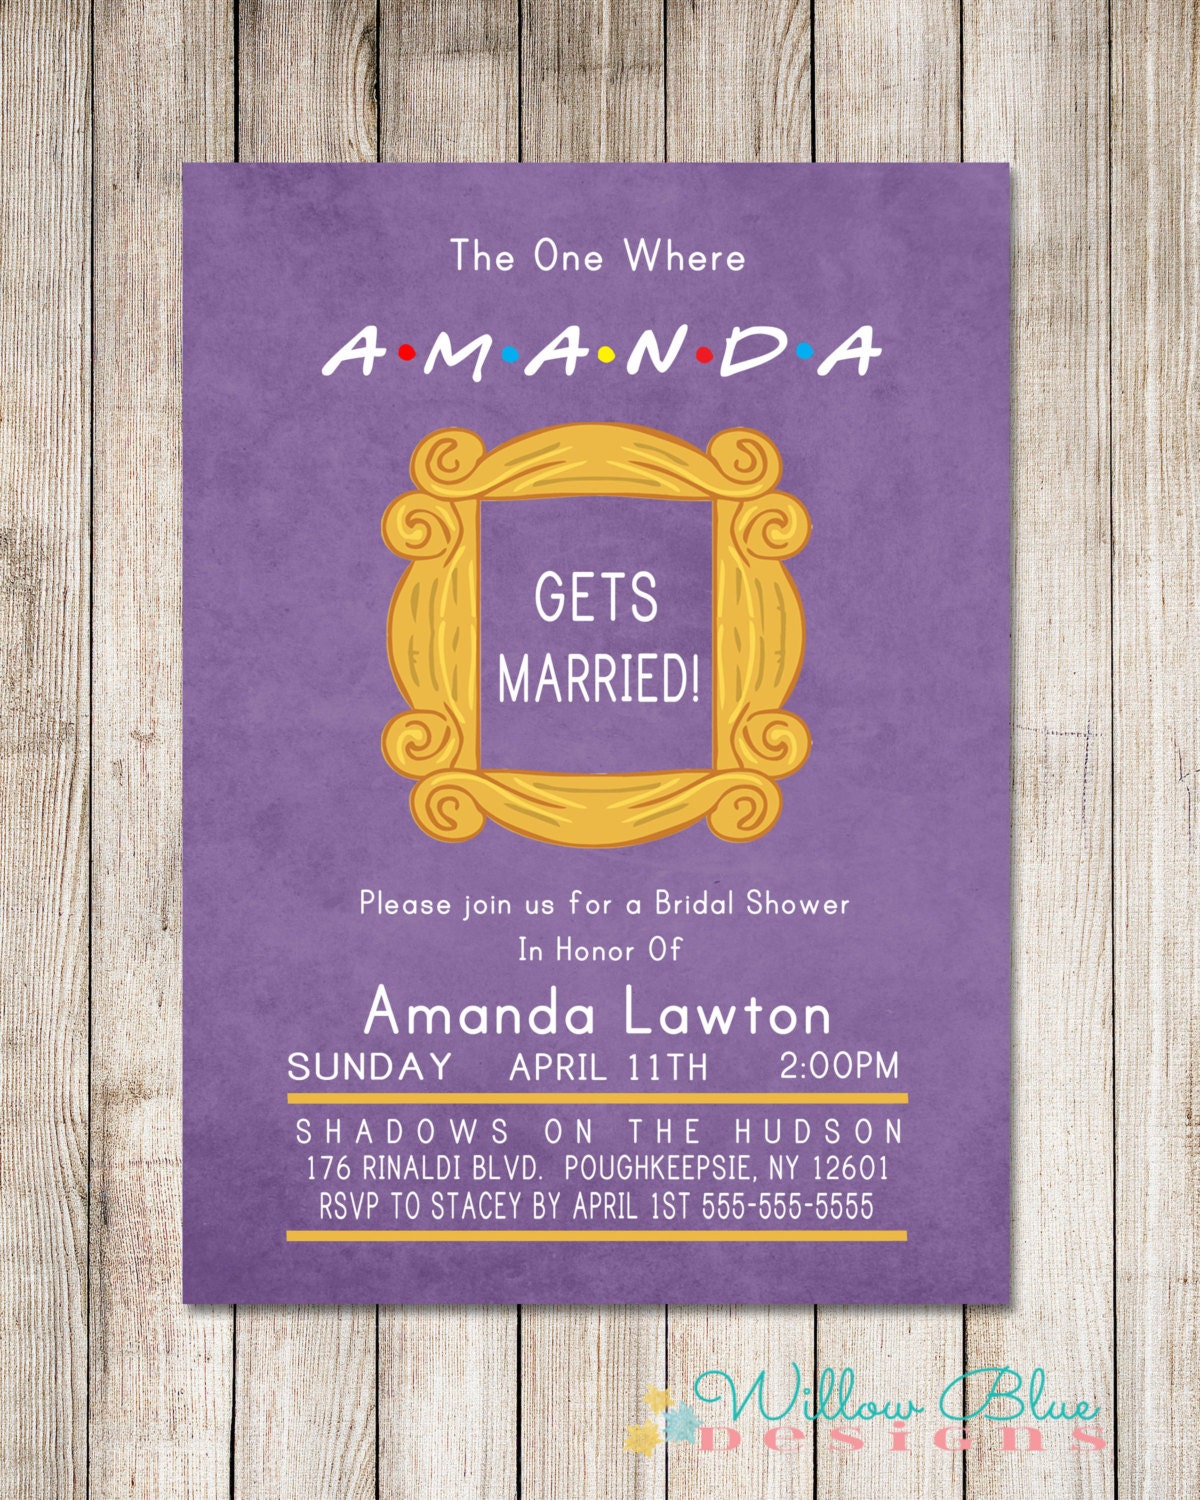 friends-theme-bridal-shower-invitation-by-willowbluedesigns